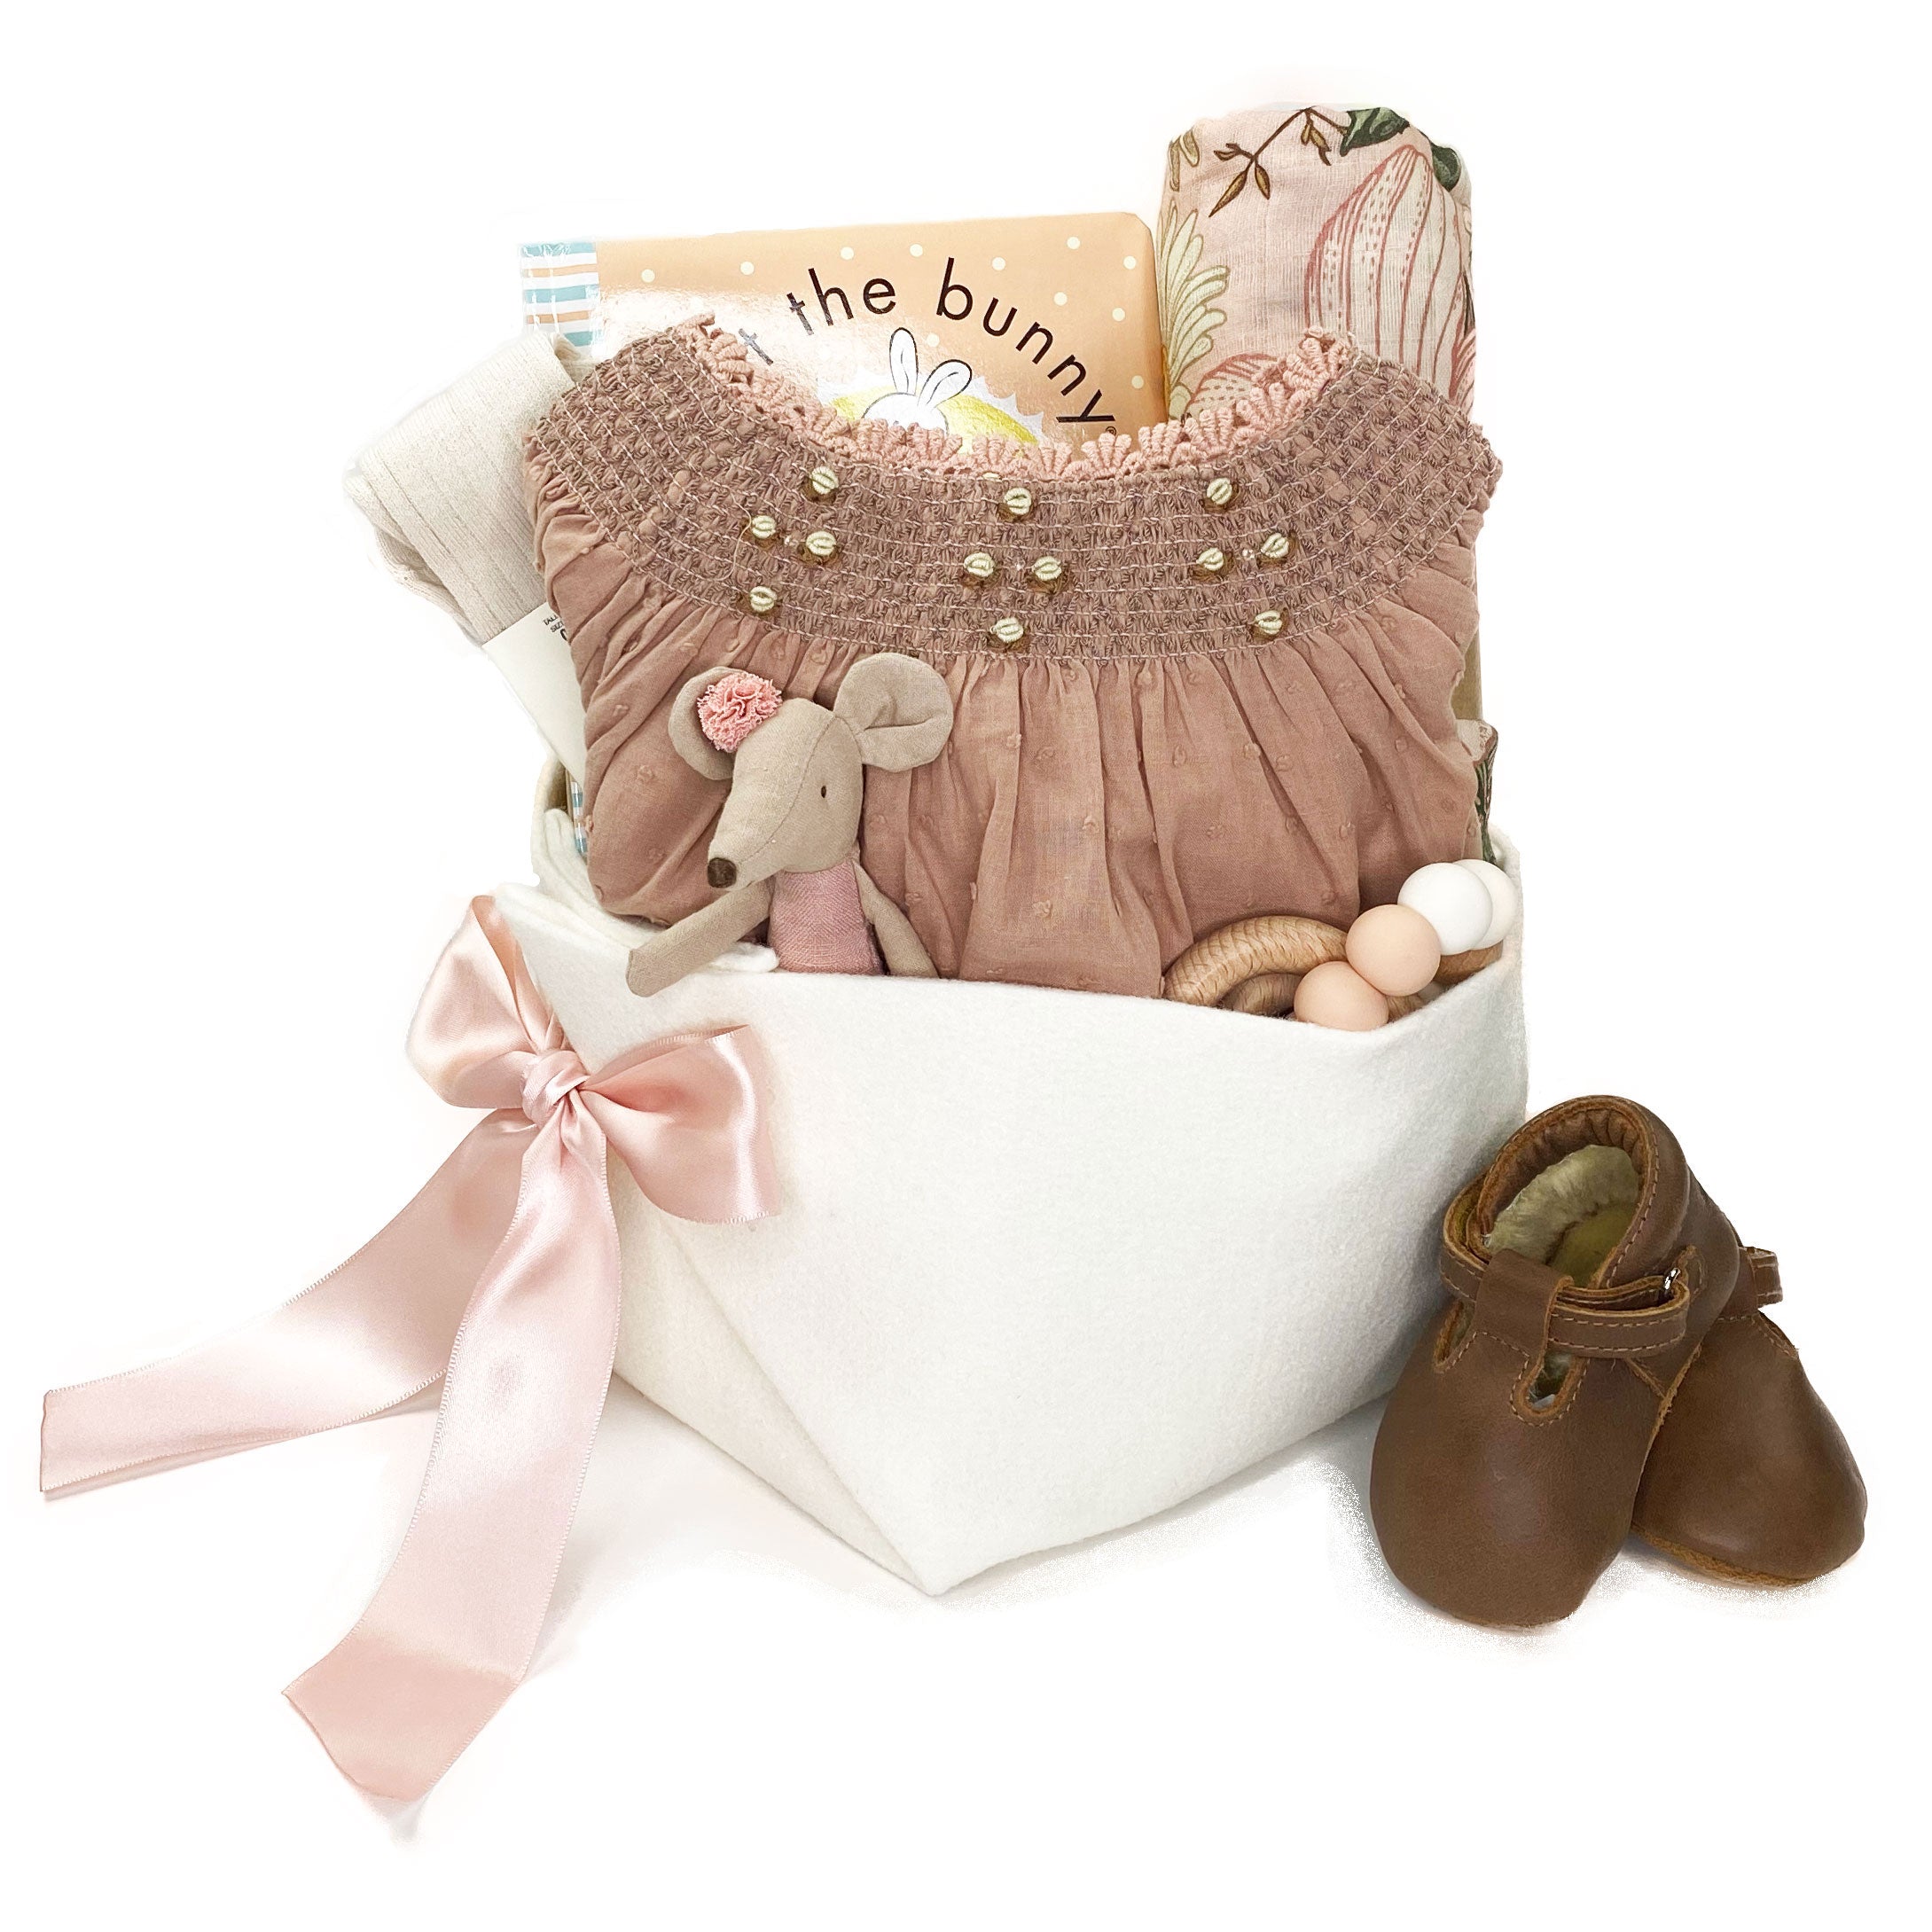 Luxury Baby Gift Basket featuring Noralee smocked dress and curated unique baby accessories at Bonjour Baby Baskets